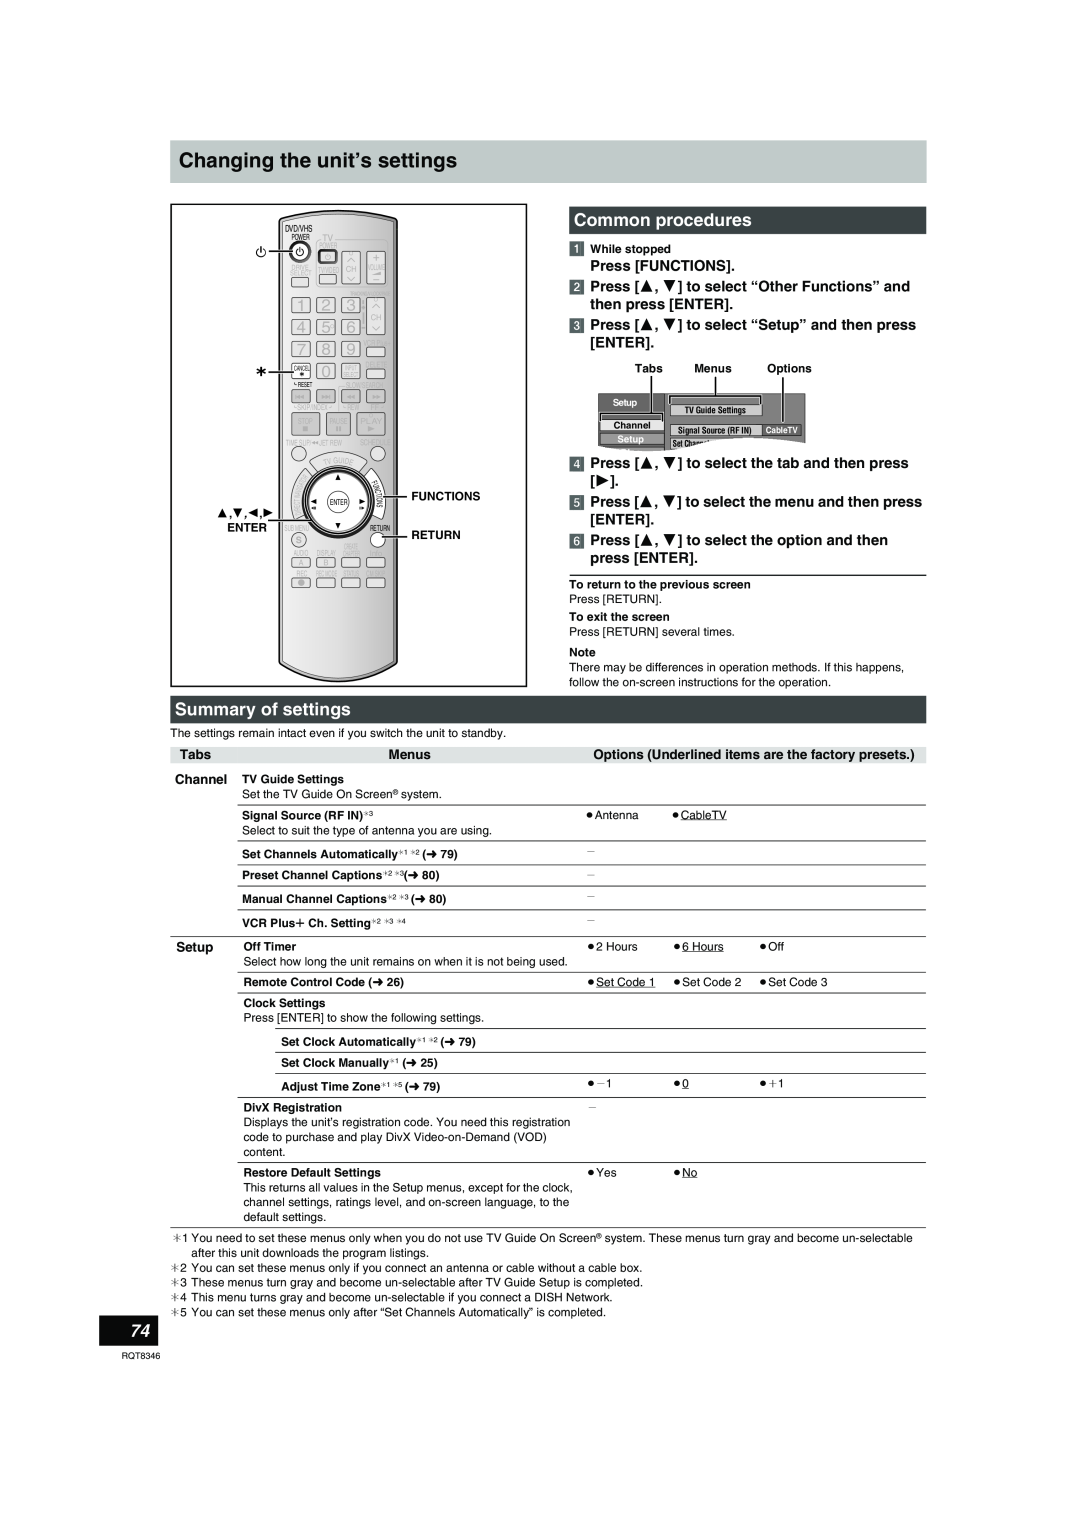 Panasonic DMR-EH75V Changing the unit’s settings, Summary of settings, Common procedures, Press FUNCTIONS, Tabs, Menus 